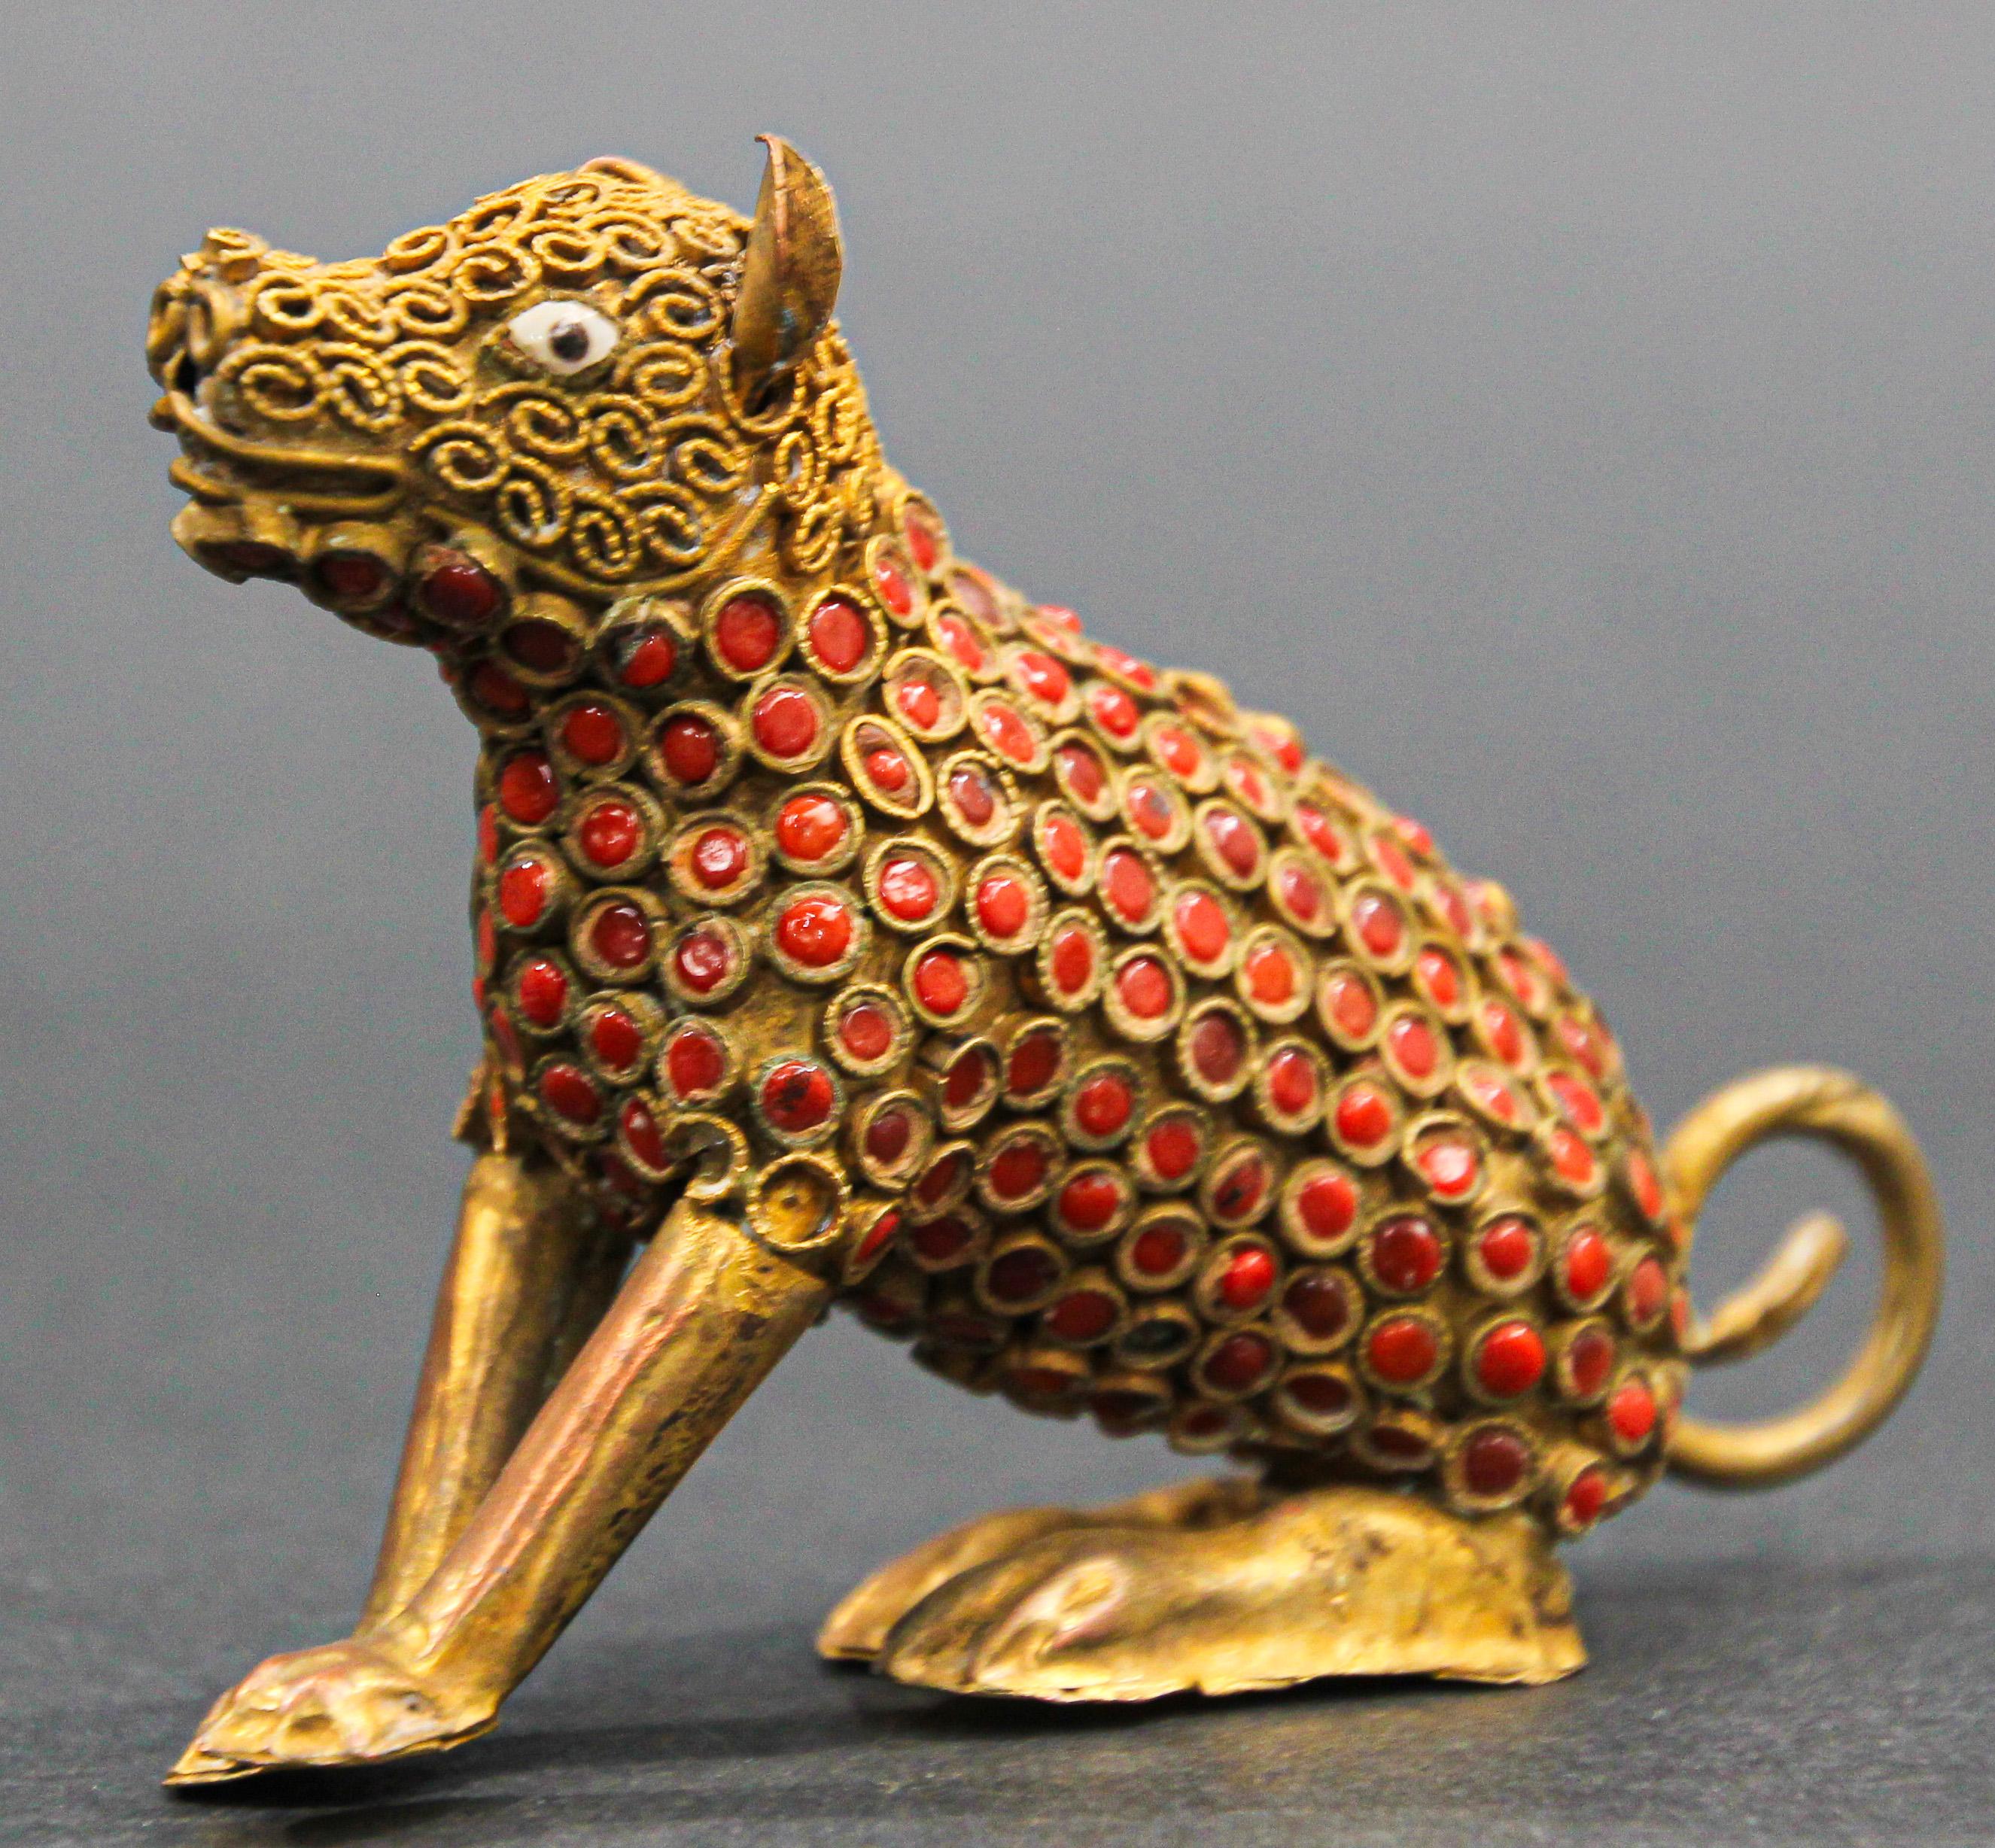 Vintage Indian Mughal style metal brass and red stone inset dog figure. 
In the style of Mughal Indian jewelry collectible small model of a seating dog with red inset stones.